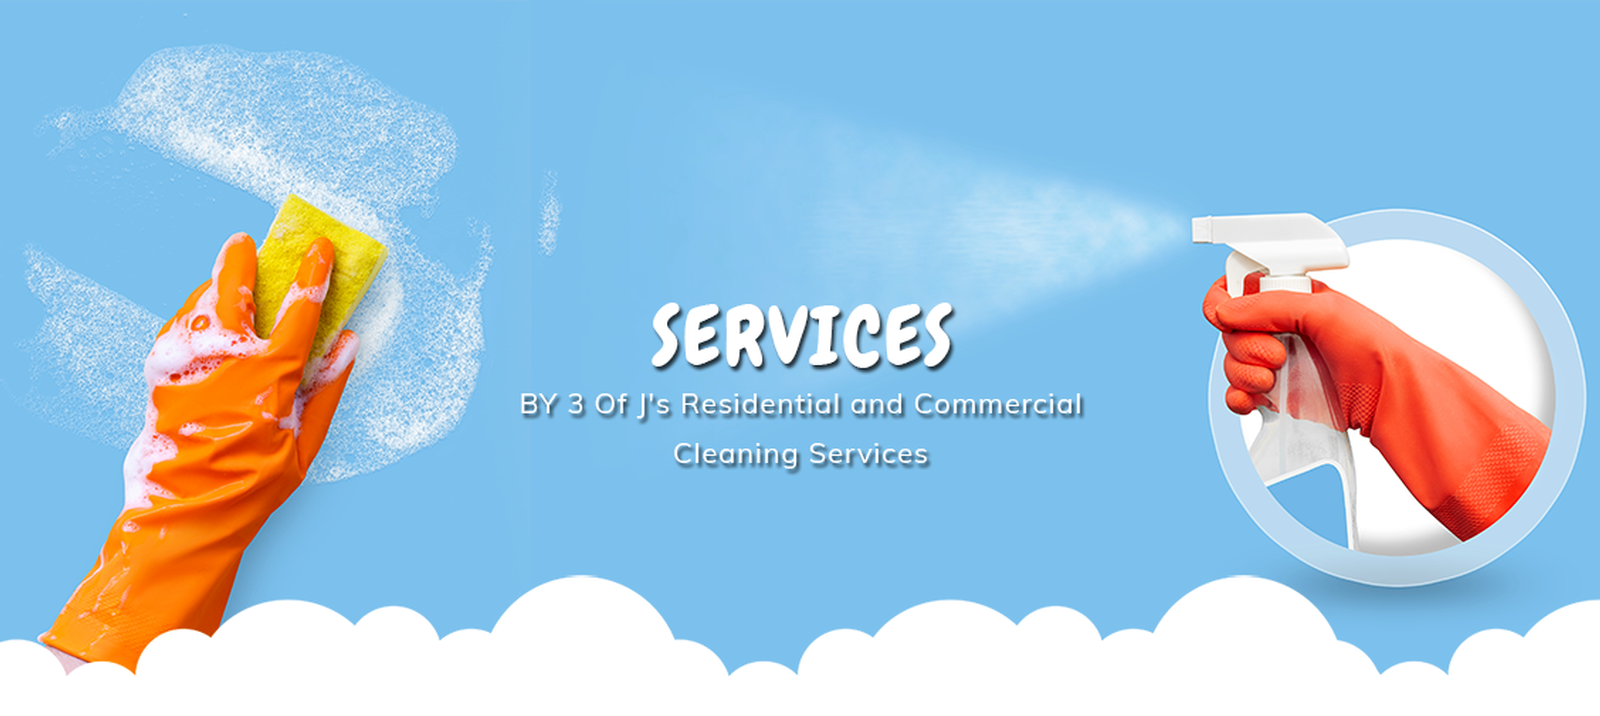 Services by 3 Of J's Residential and Commercial Cleaning Services